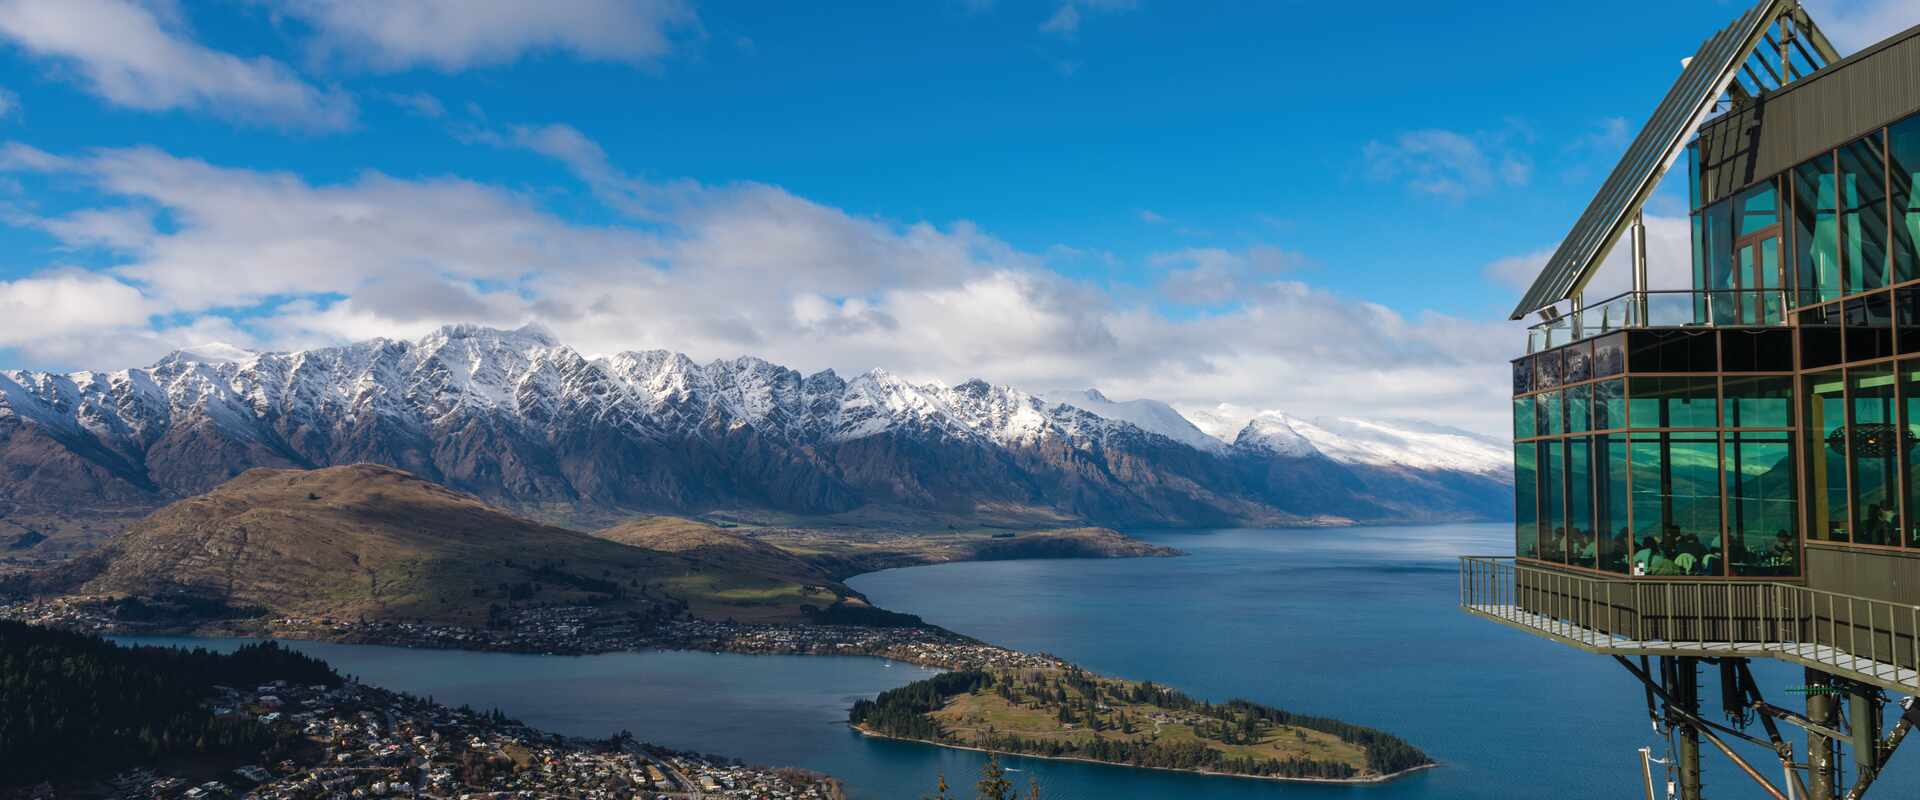 The Queenstown lookout on South Island, New Zealand